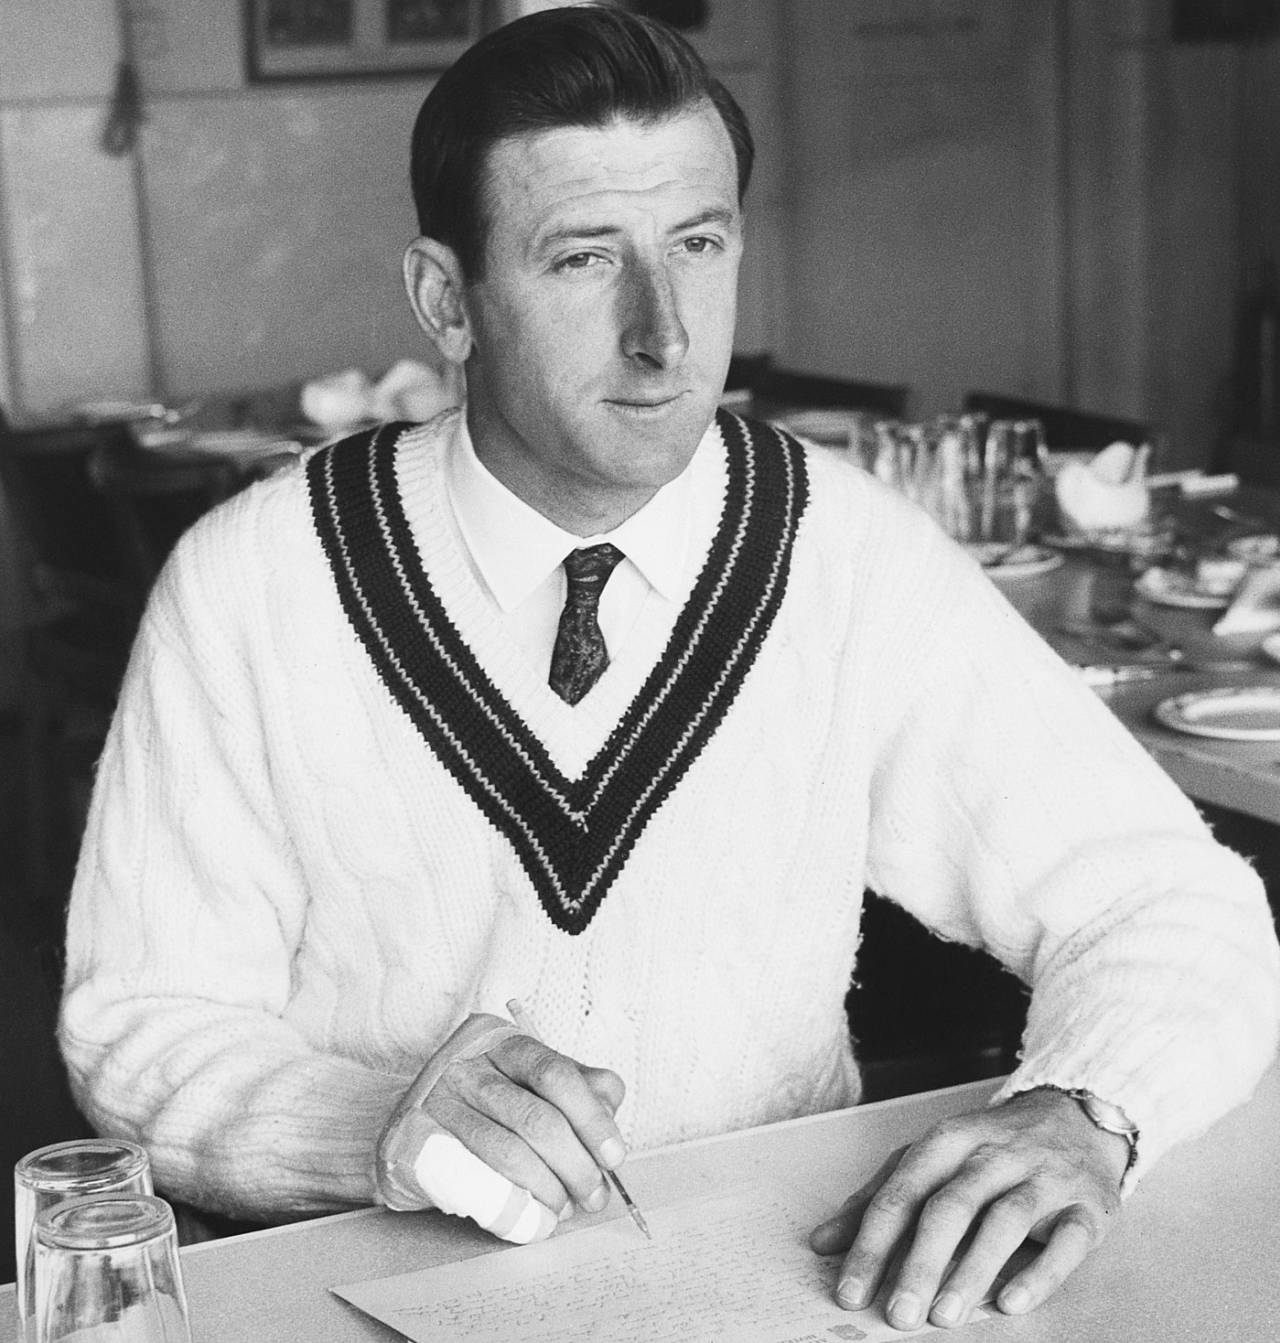 Bill Lawry was seen as a dour batsman but he had a different personality off the field, in line with his commentary avatar&nbsp;&nbsp;&bull;&nbsp;&nbsp;Hulton Archive